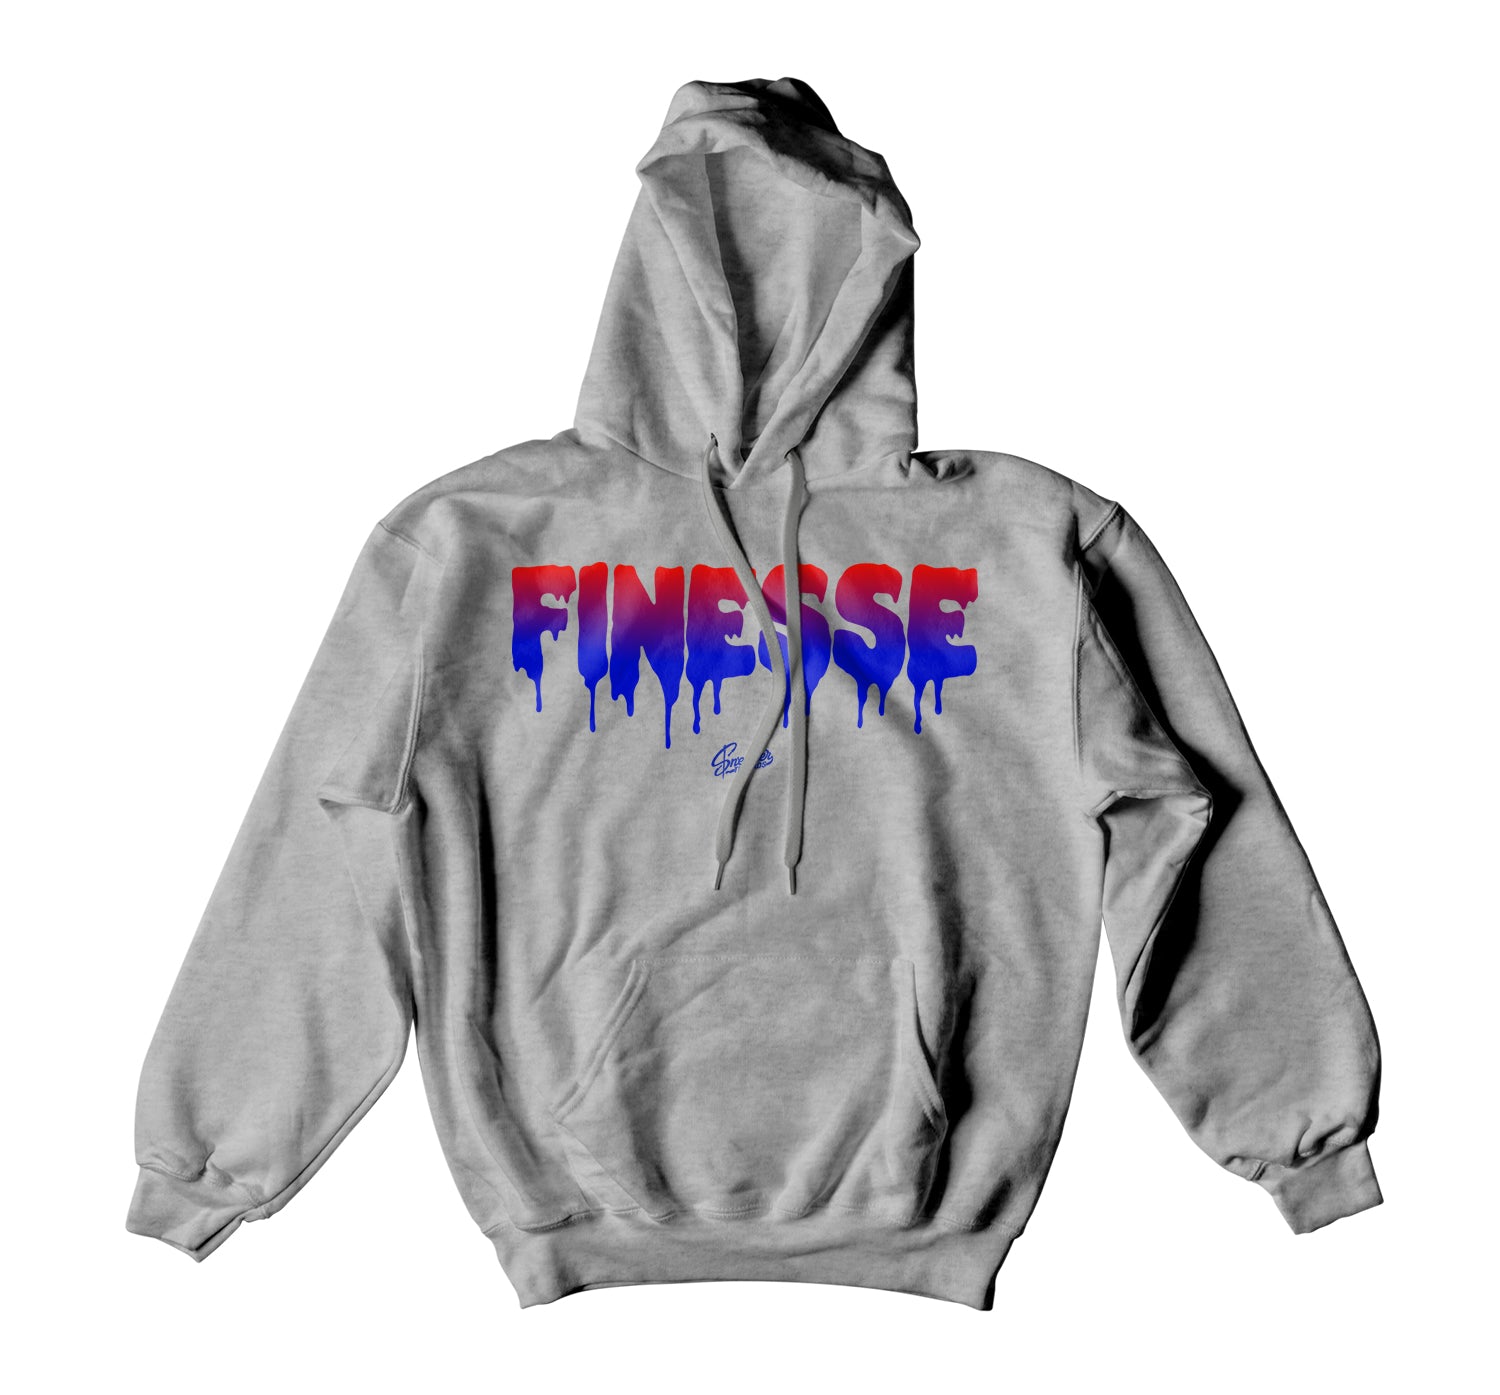 All Star 2020 Tune Squad Hoody  - Finesse - Heather Grey